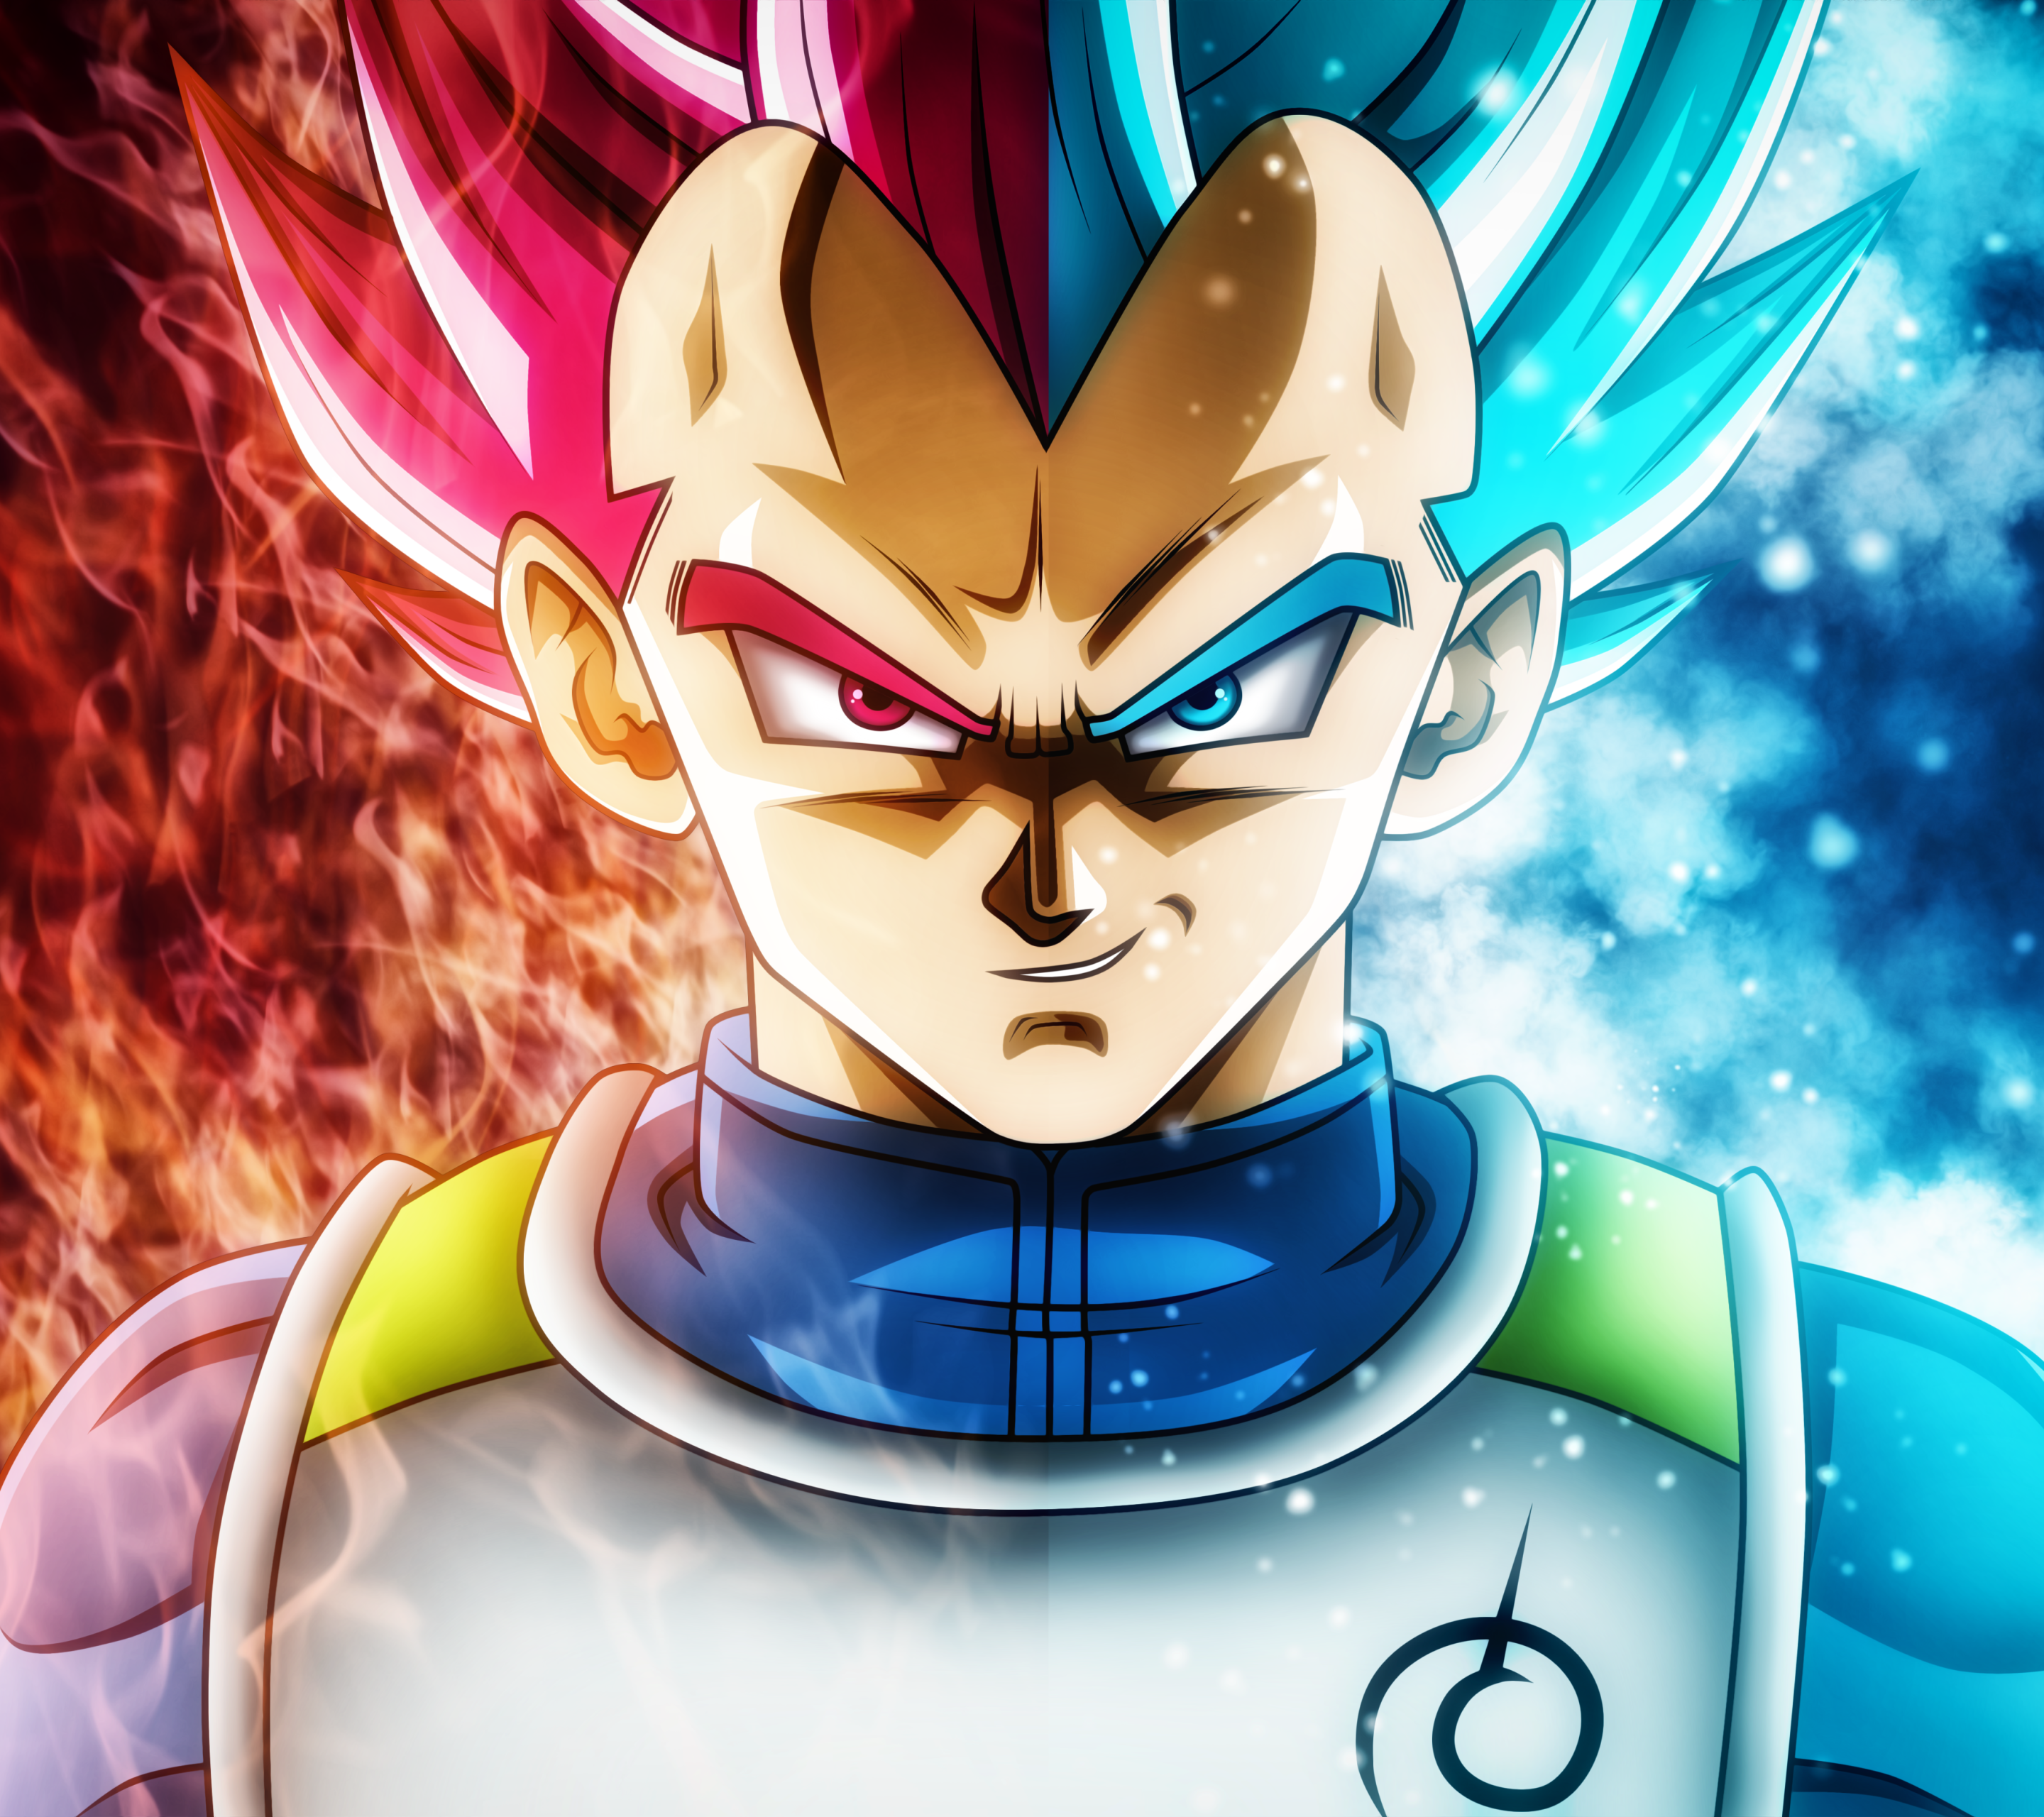 Download This Wallpaper Anime Dragon Ball Super (2880x2560) For All Your Phones And Tablets. Anime Dragon Ball Super, Anime, Dragon Ball Super Wallpaper